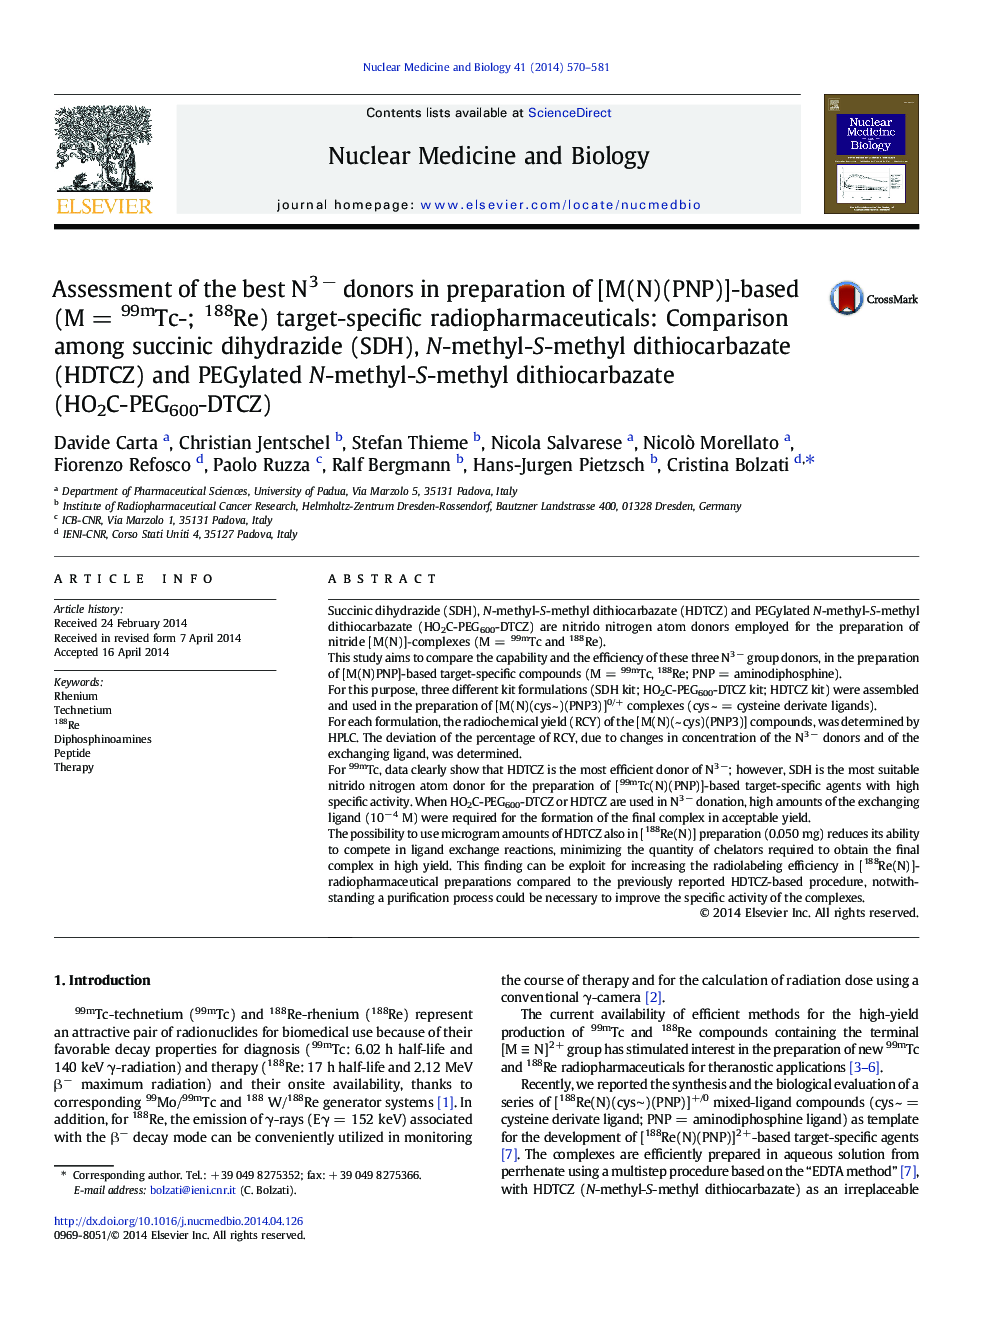 Assessment of the best N3 − donors in preparation of [M(N)(PNP)]-based (M = 99mTc-; 188Re) target-specific radiopharmaceuticals: Comparison among succinic dihydrazide (SDH), N-methyl-S-methyl dithiocarbazate (HDTCZ) and PEGylated N-methyl-S-methyl dithioc